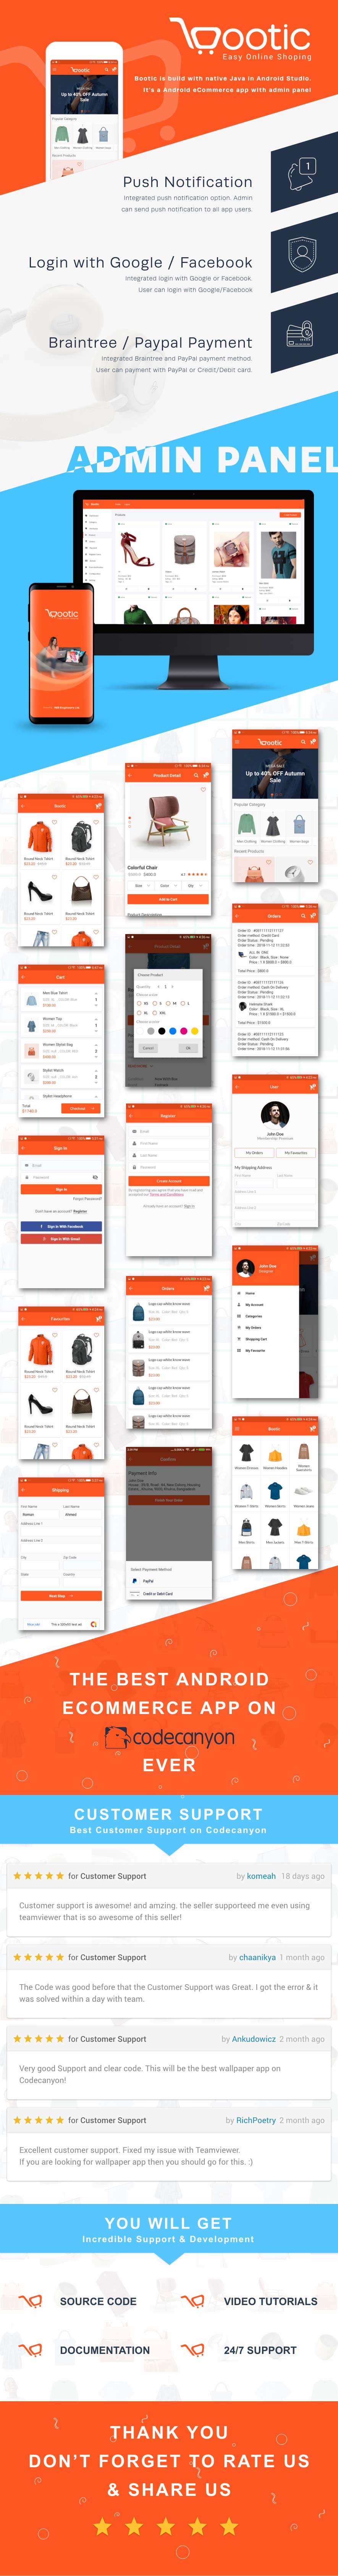 Bootic Full - An Android Ecommerce App With Admin Panel - 6